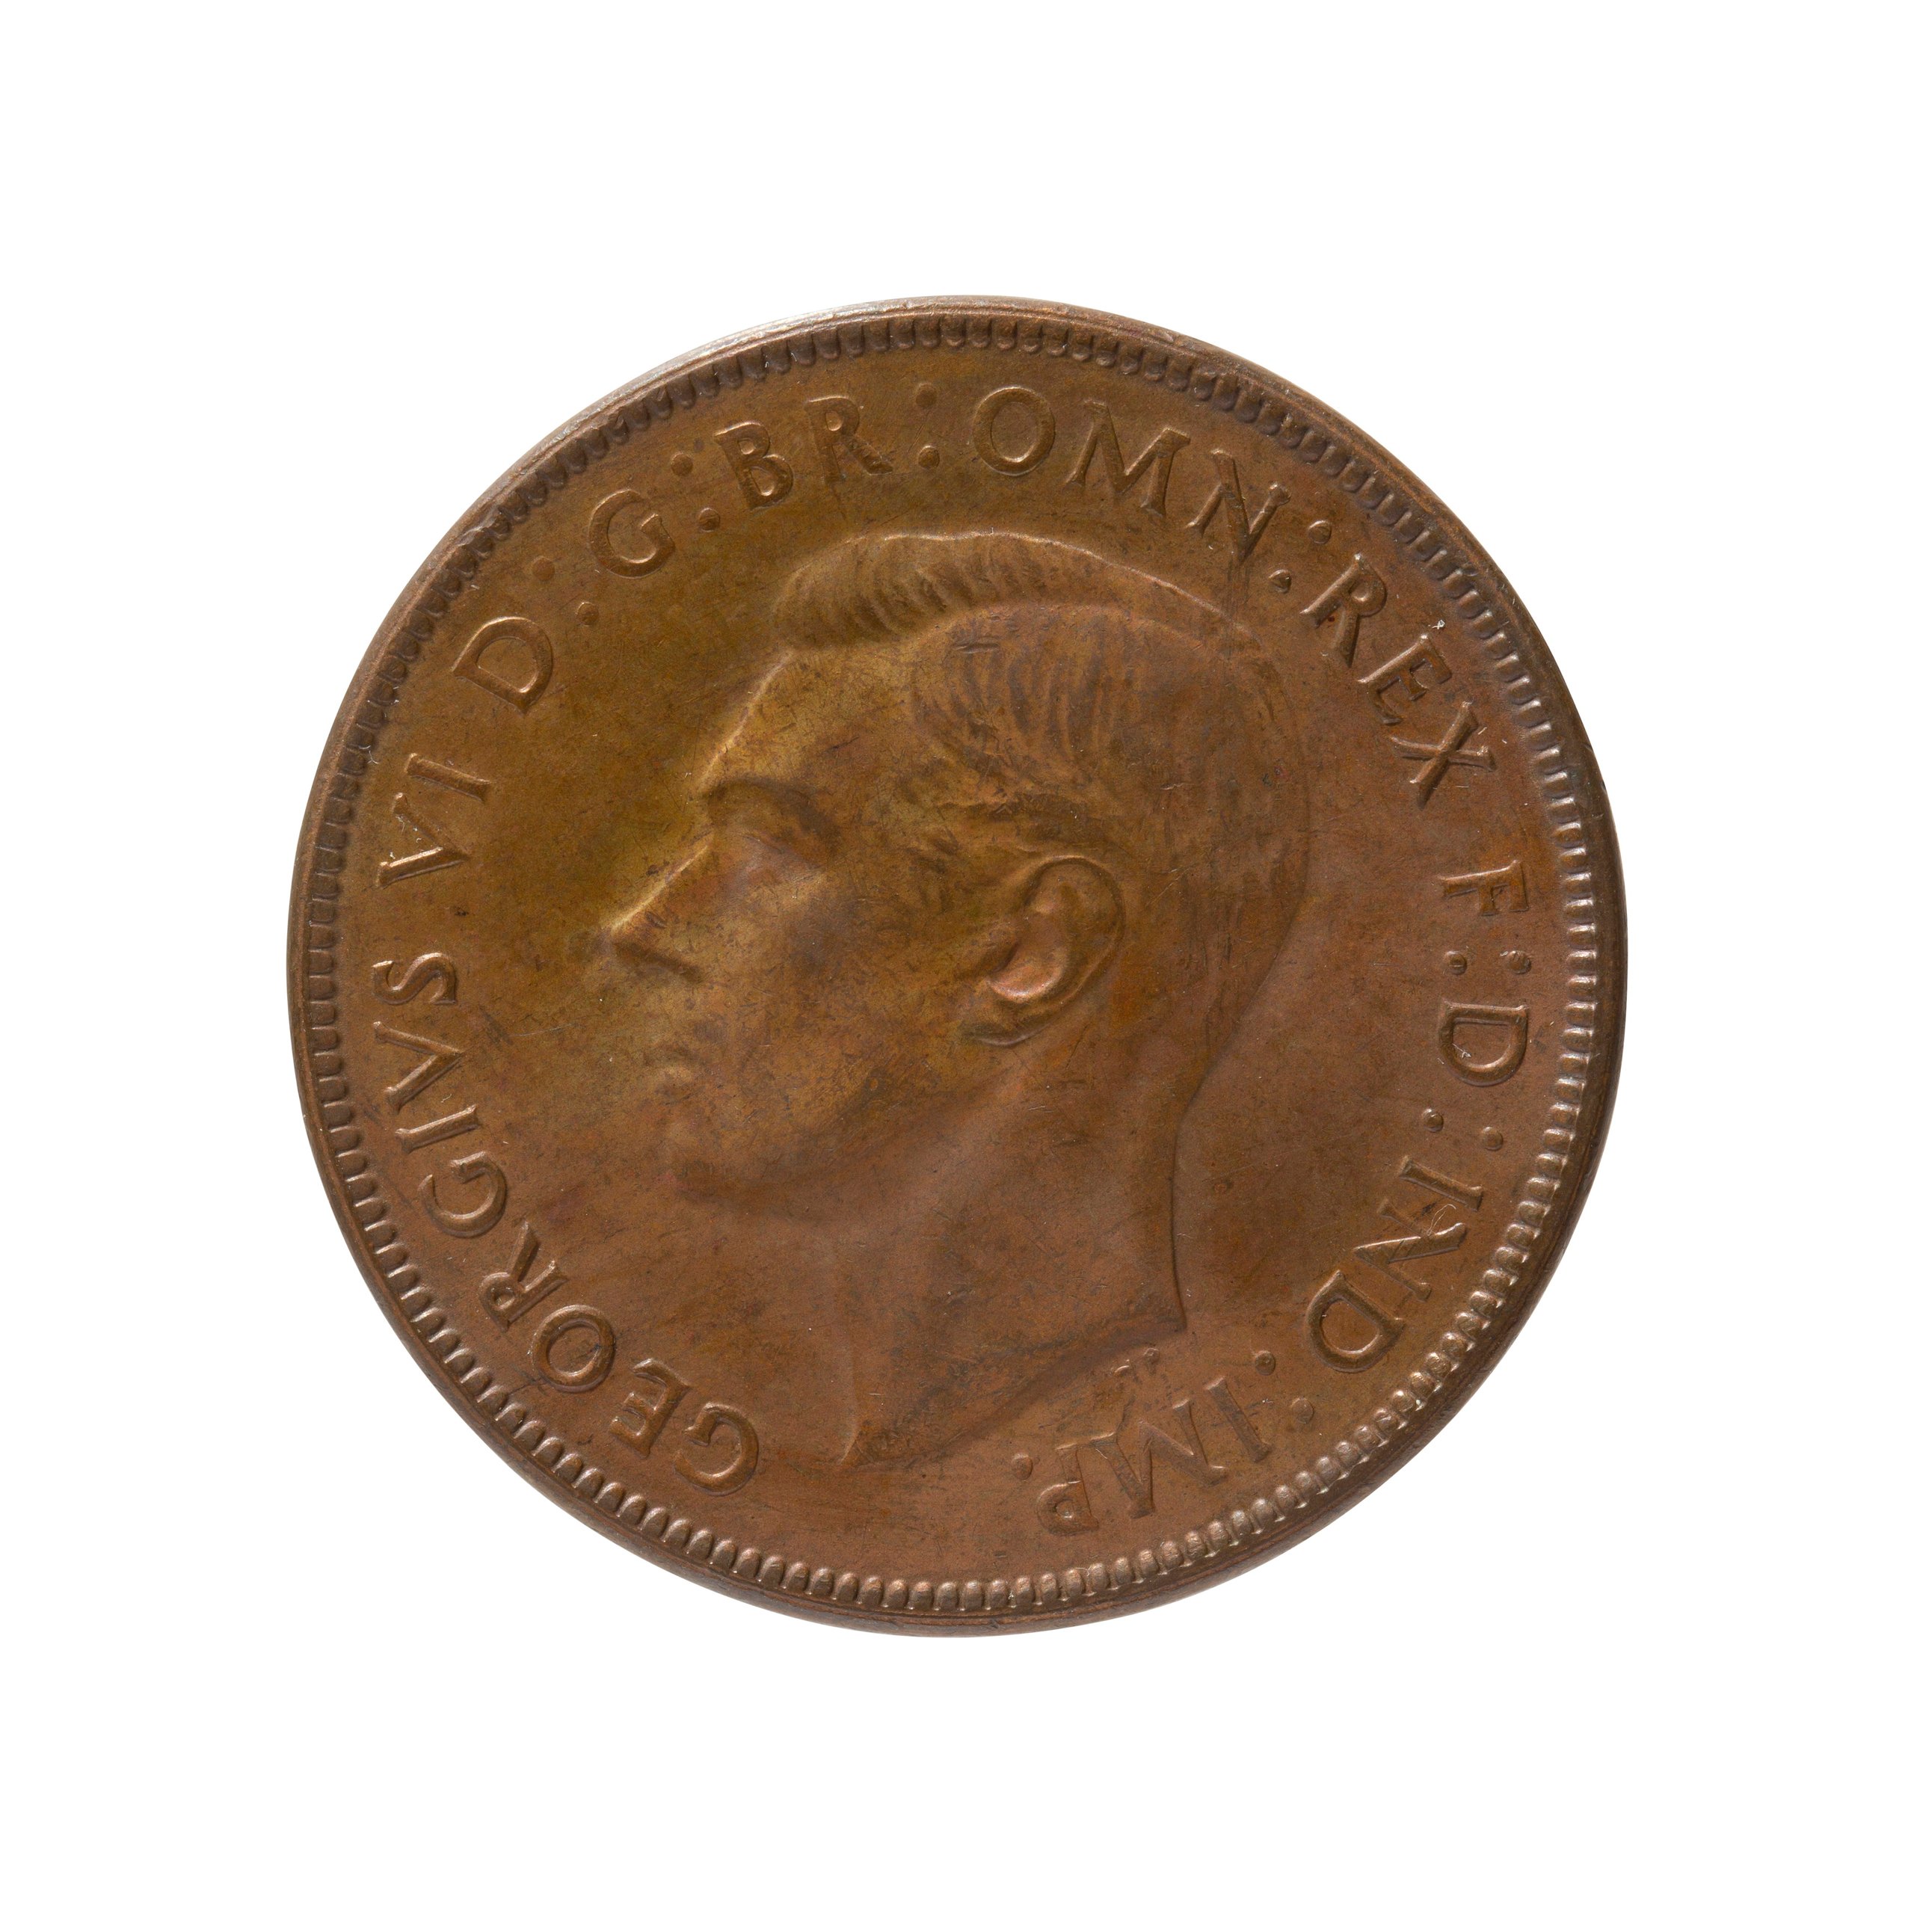 Australian 'King George' Penny coin